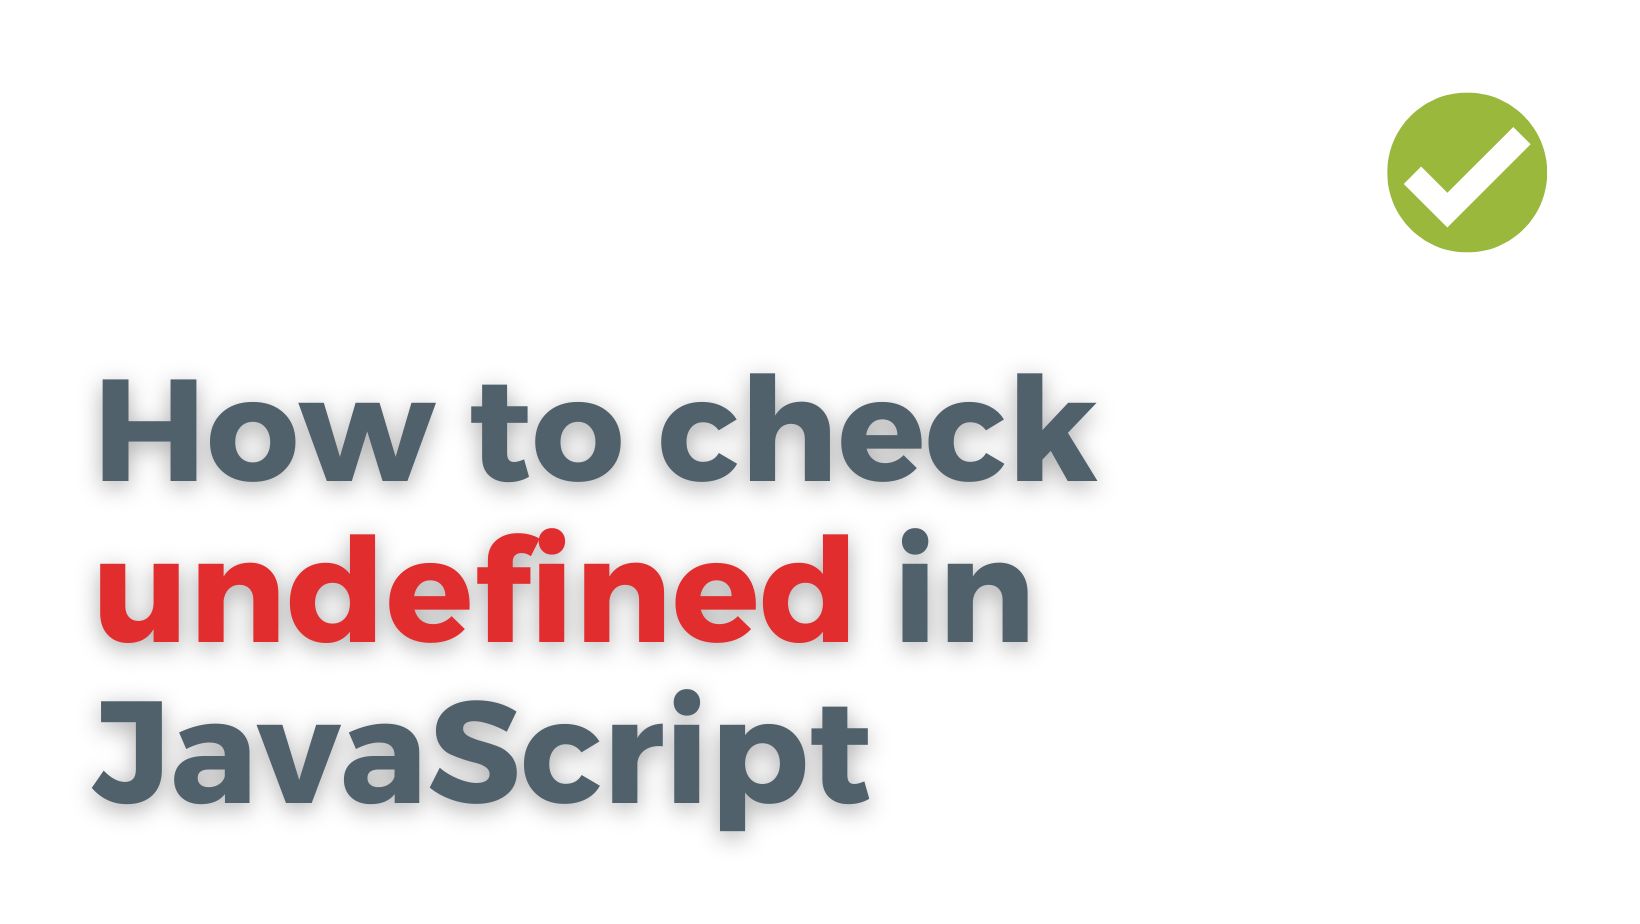 How to check undefined in JavaScript